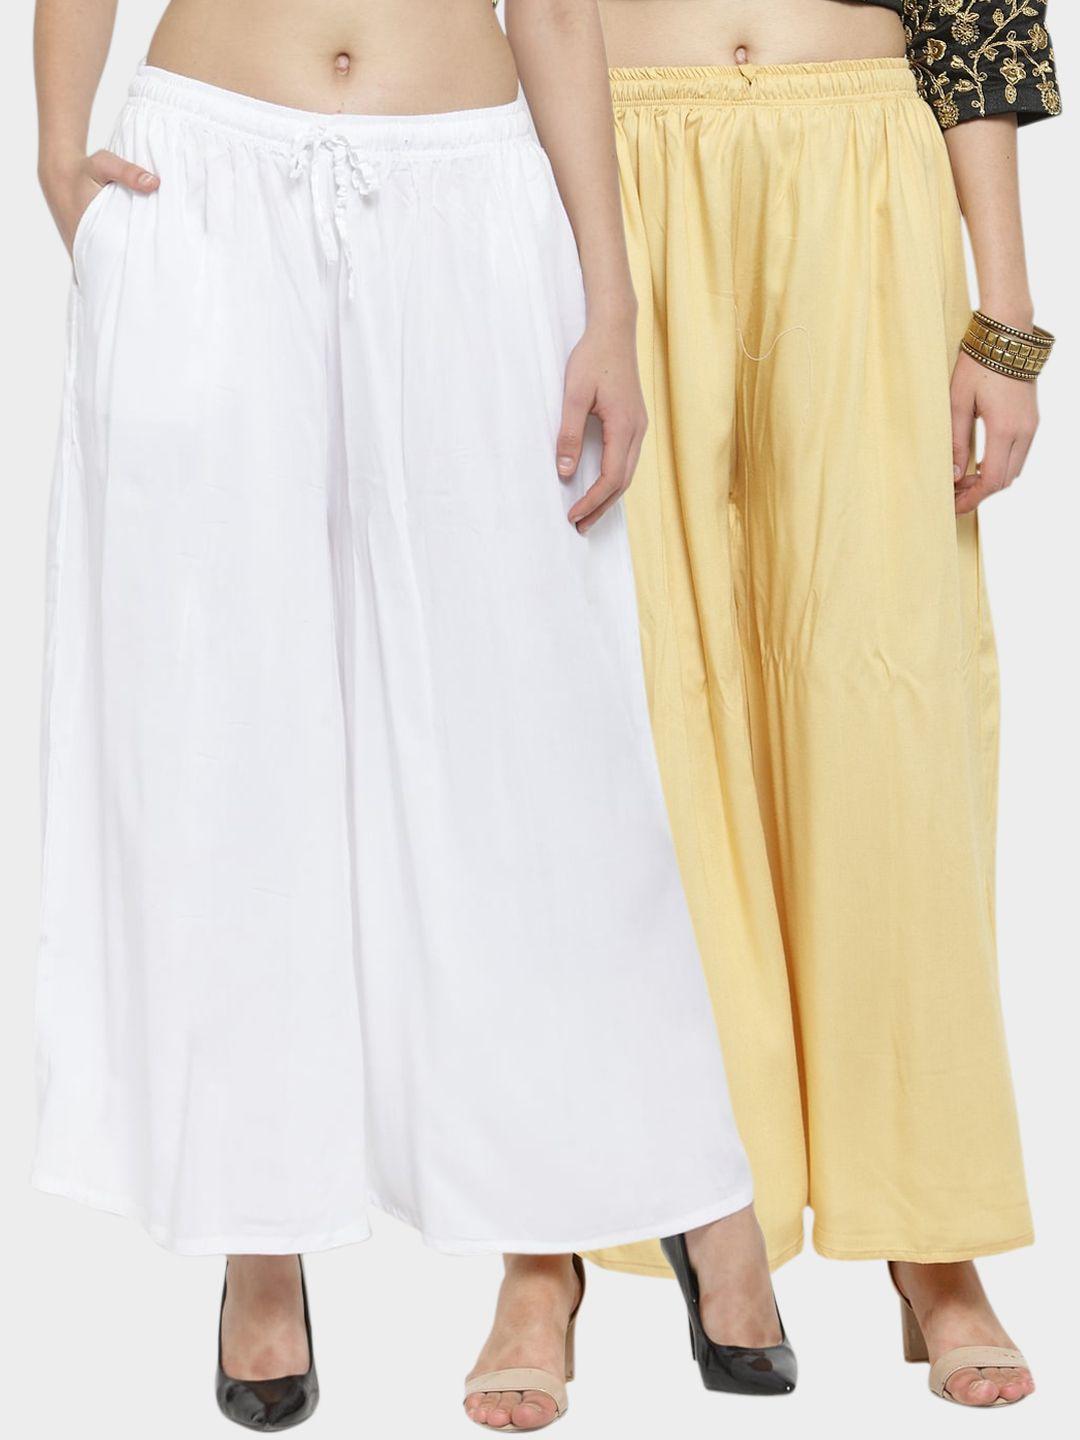 clora creation women pack of 2 off-white & beige solid wide leg palazzos